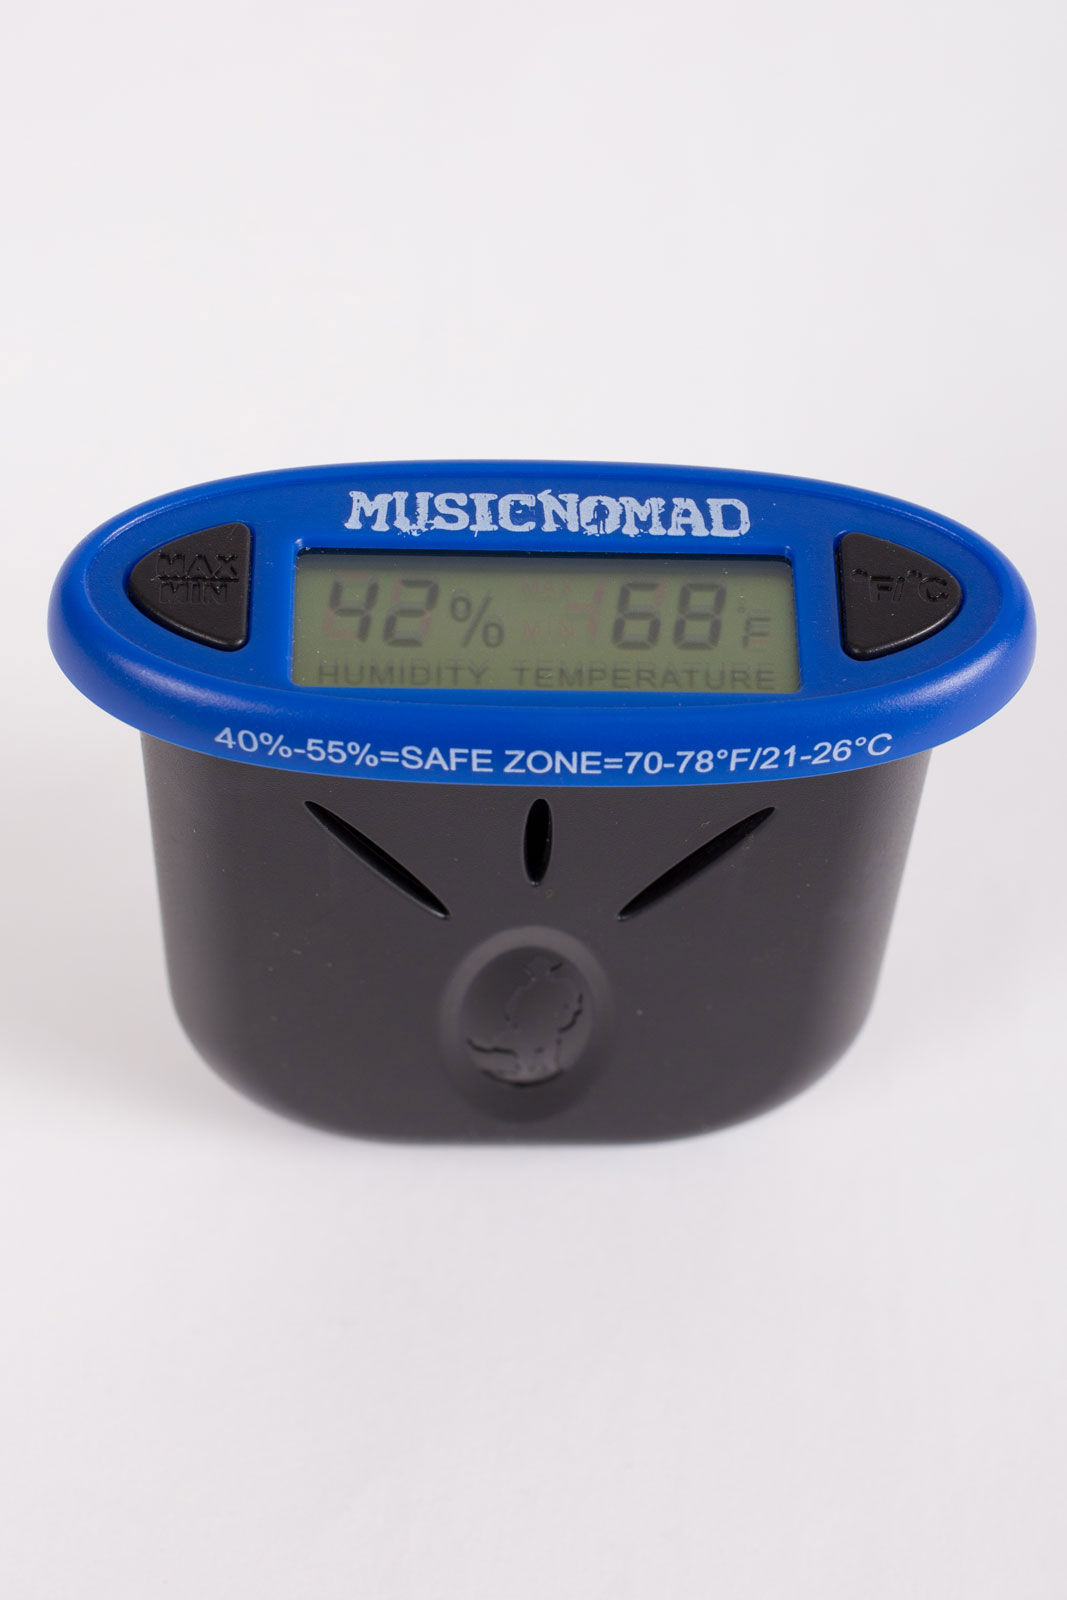 MUSICNOMAD MN305 THE HUMIREADER - HUMIDITY AND TEMPERATURE MONITOR